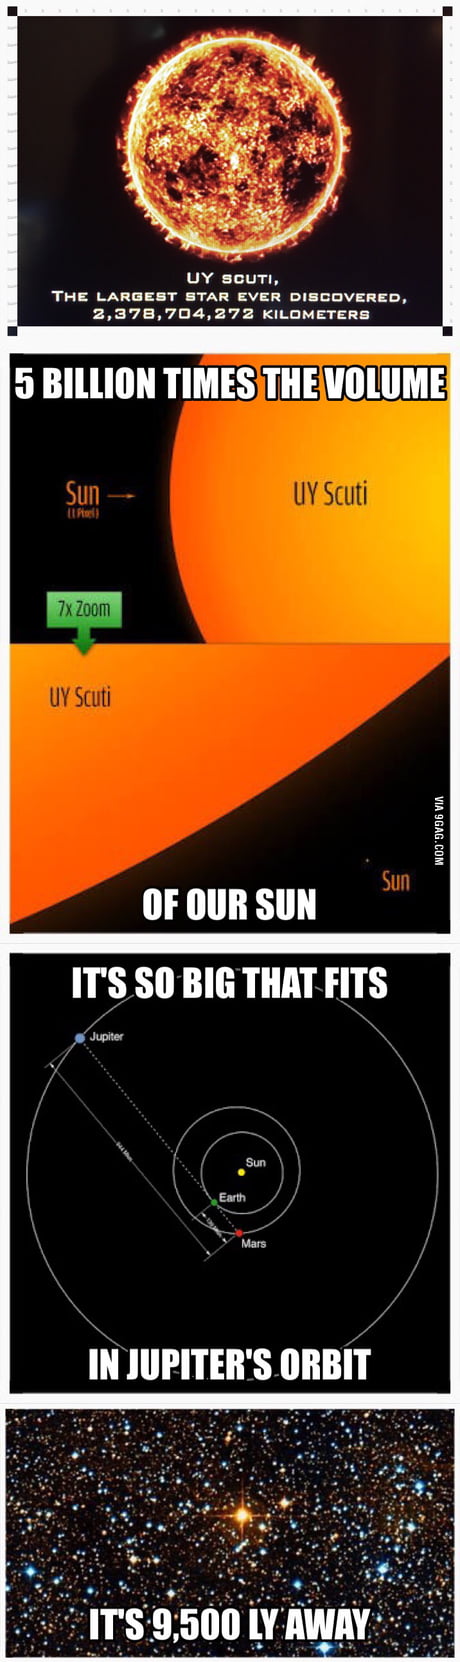 Meet Uy Scuti What Do You Think About It 9gag